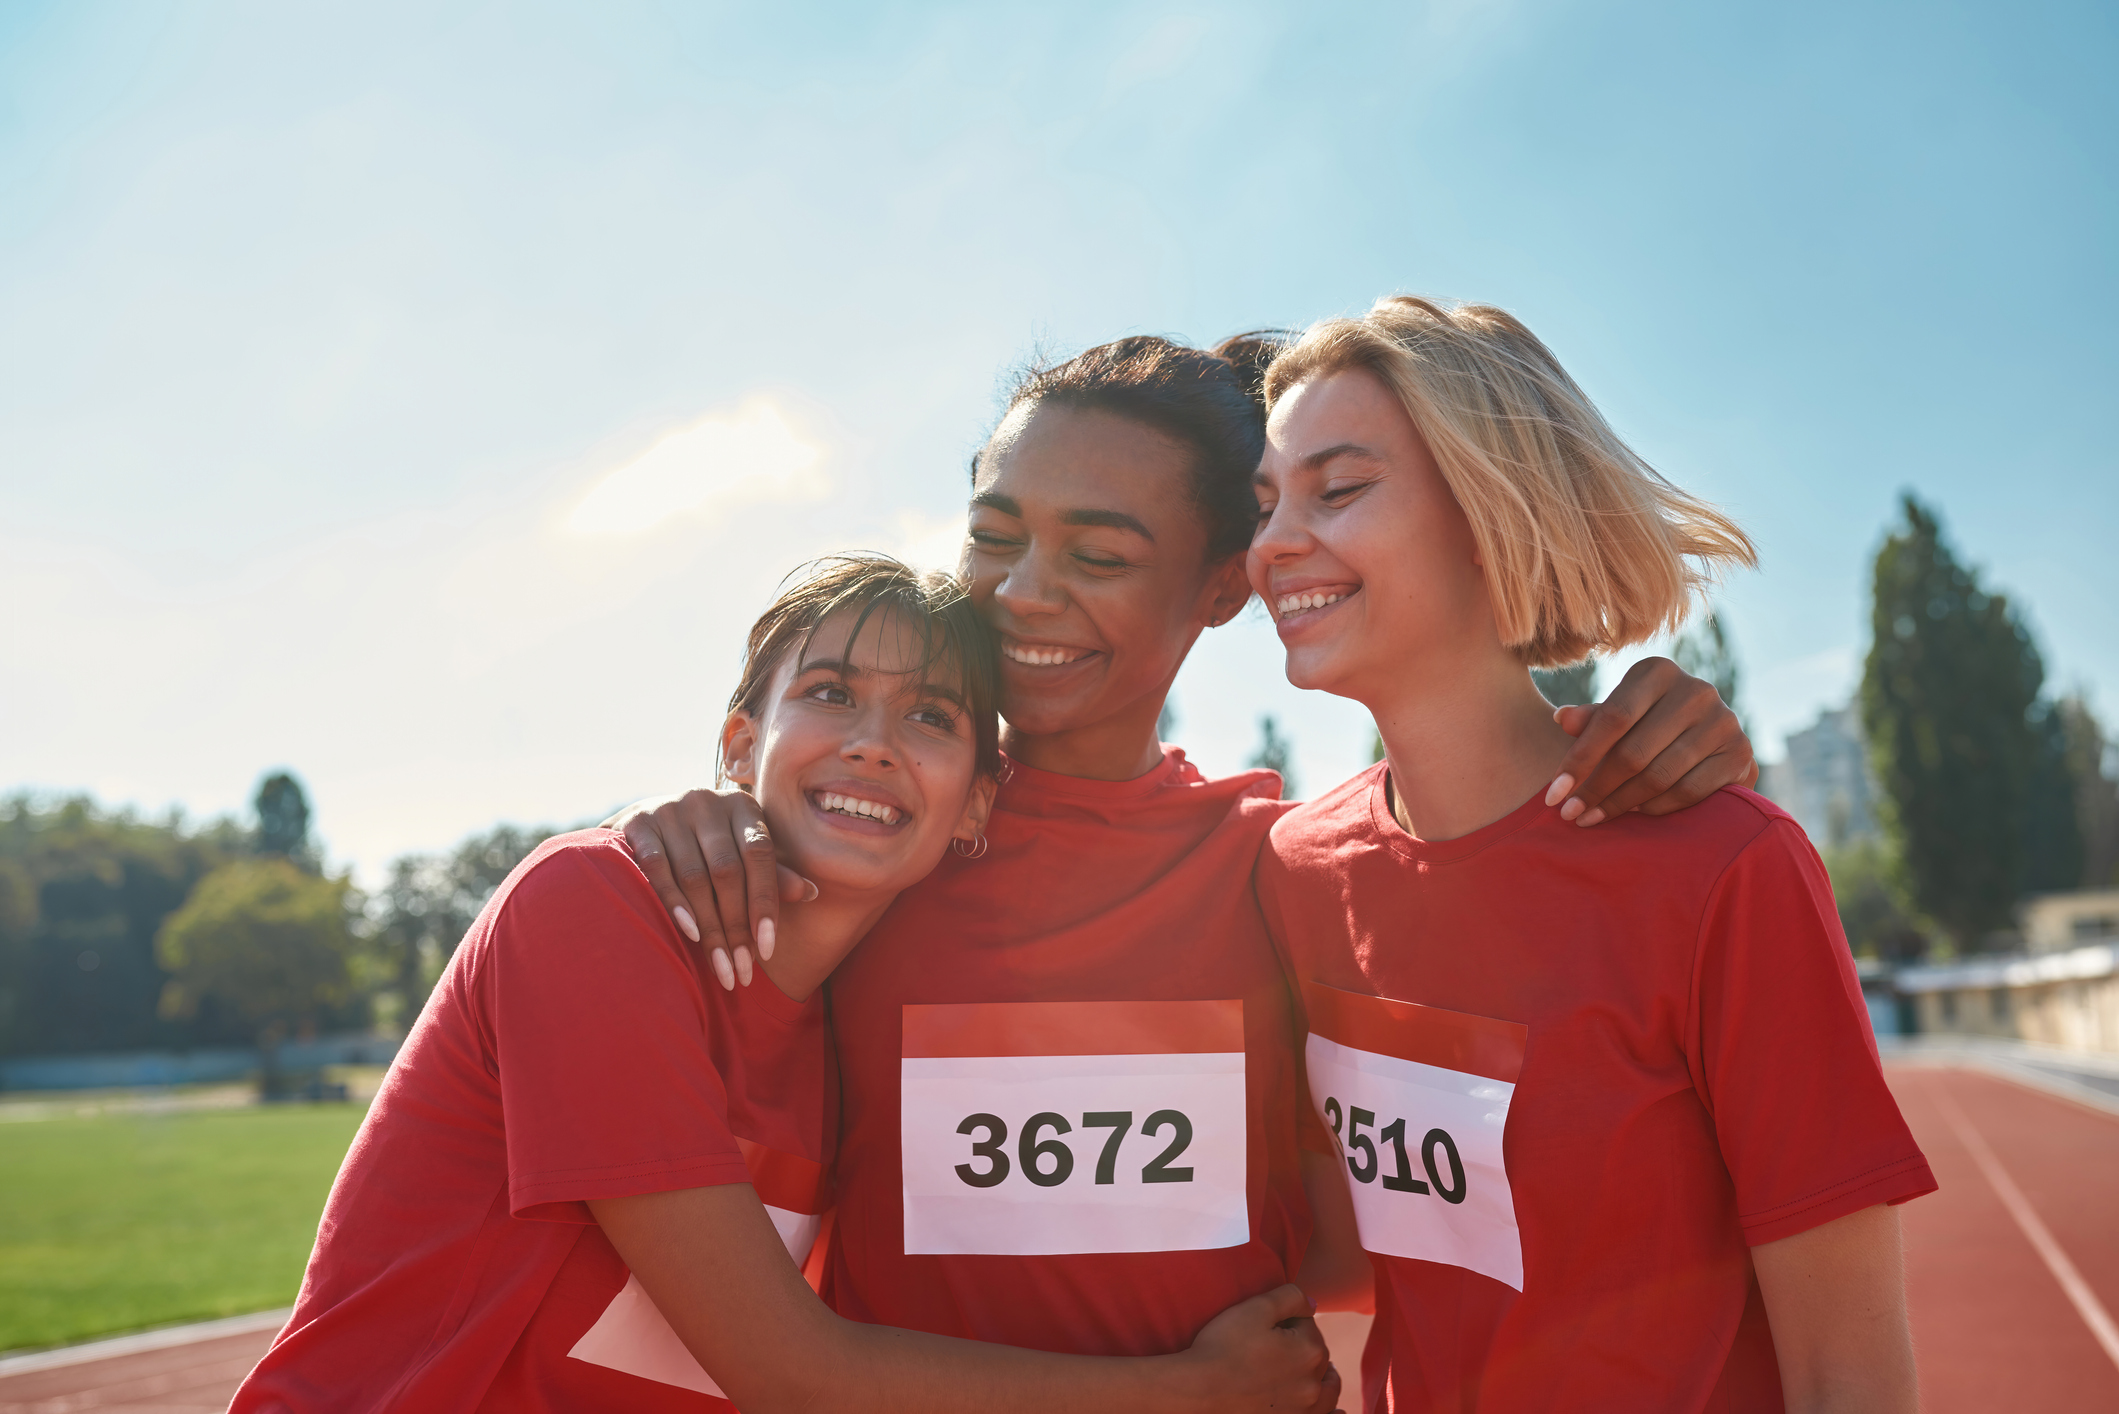 Portrait of young professional female runners wearing t shirts with number looking happy while standing together, ready for the race. Sports, active lifestyle, motivation concept